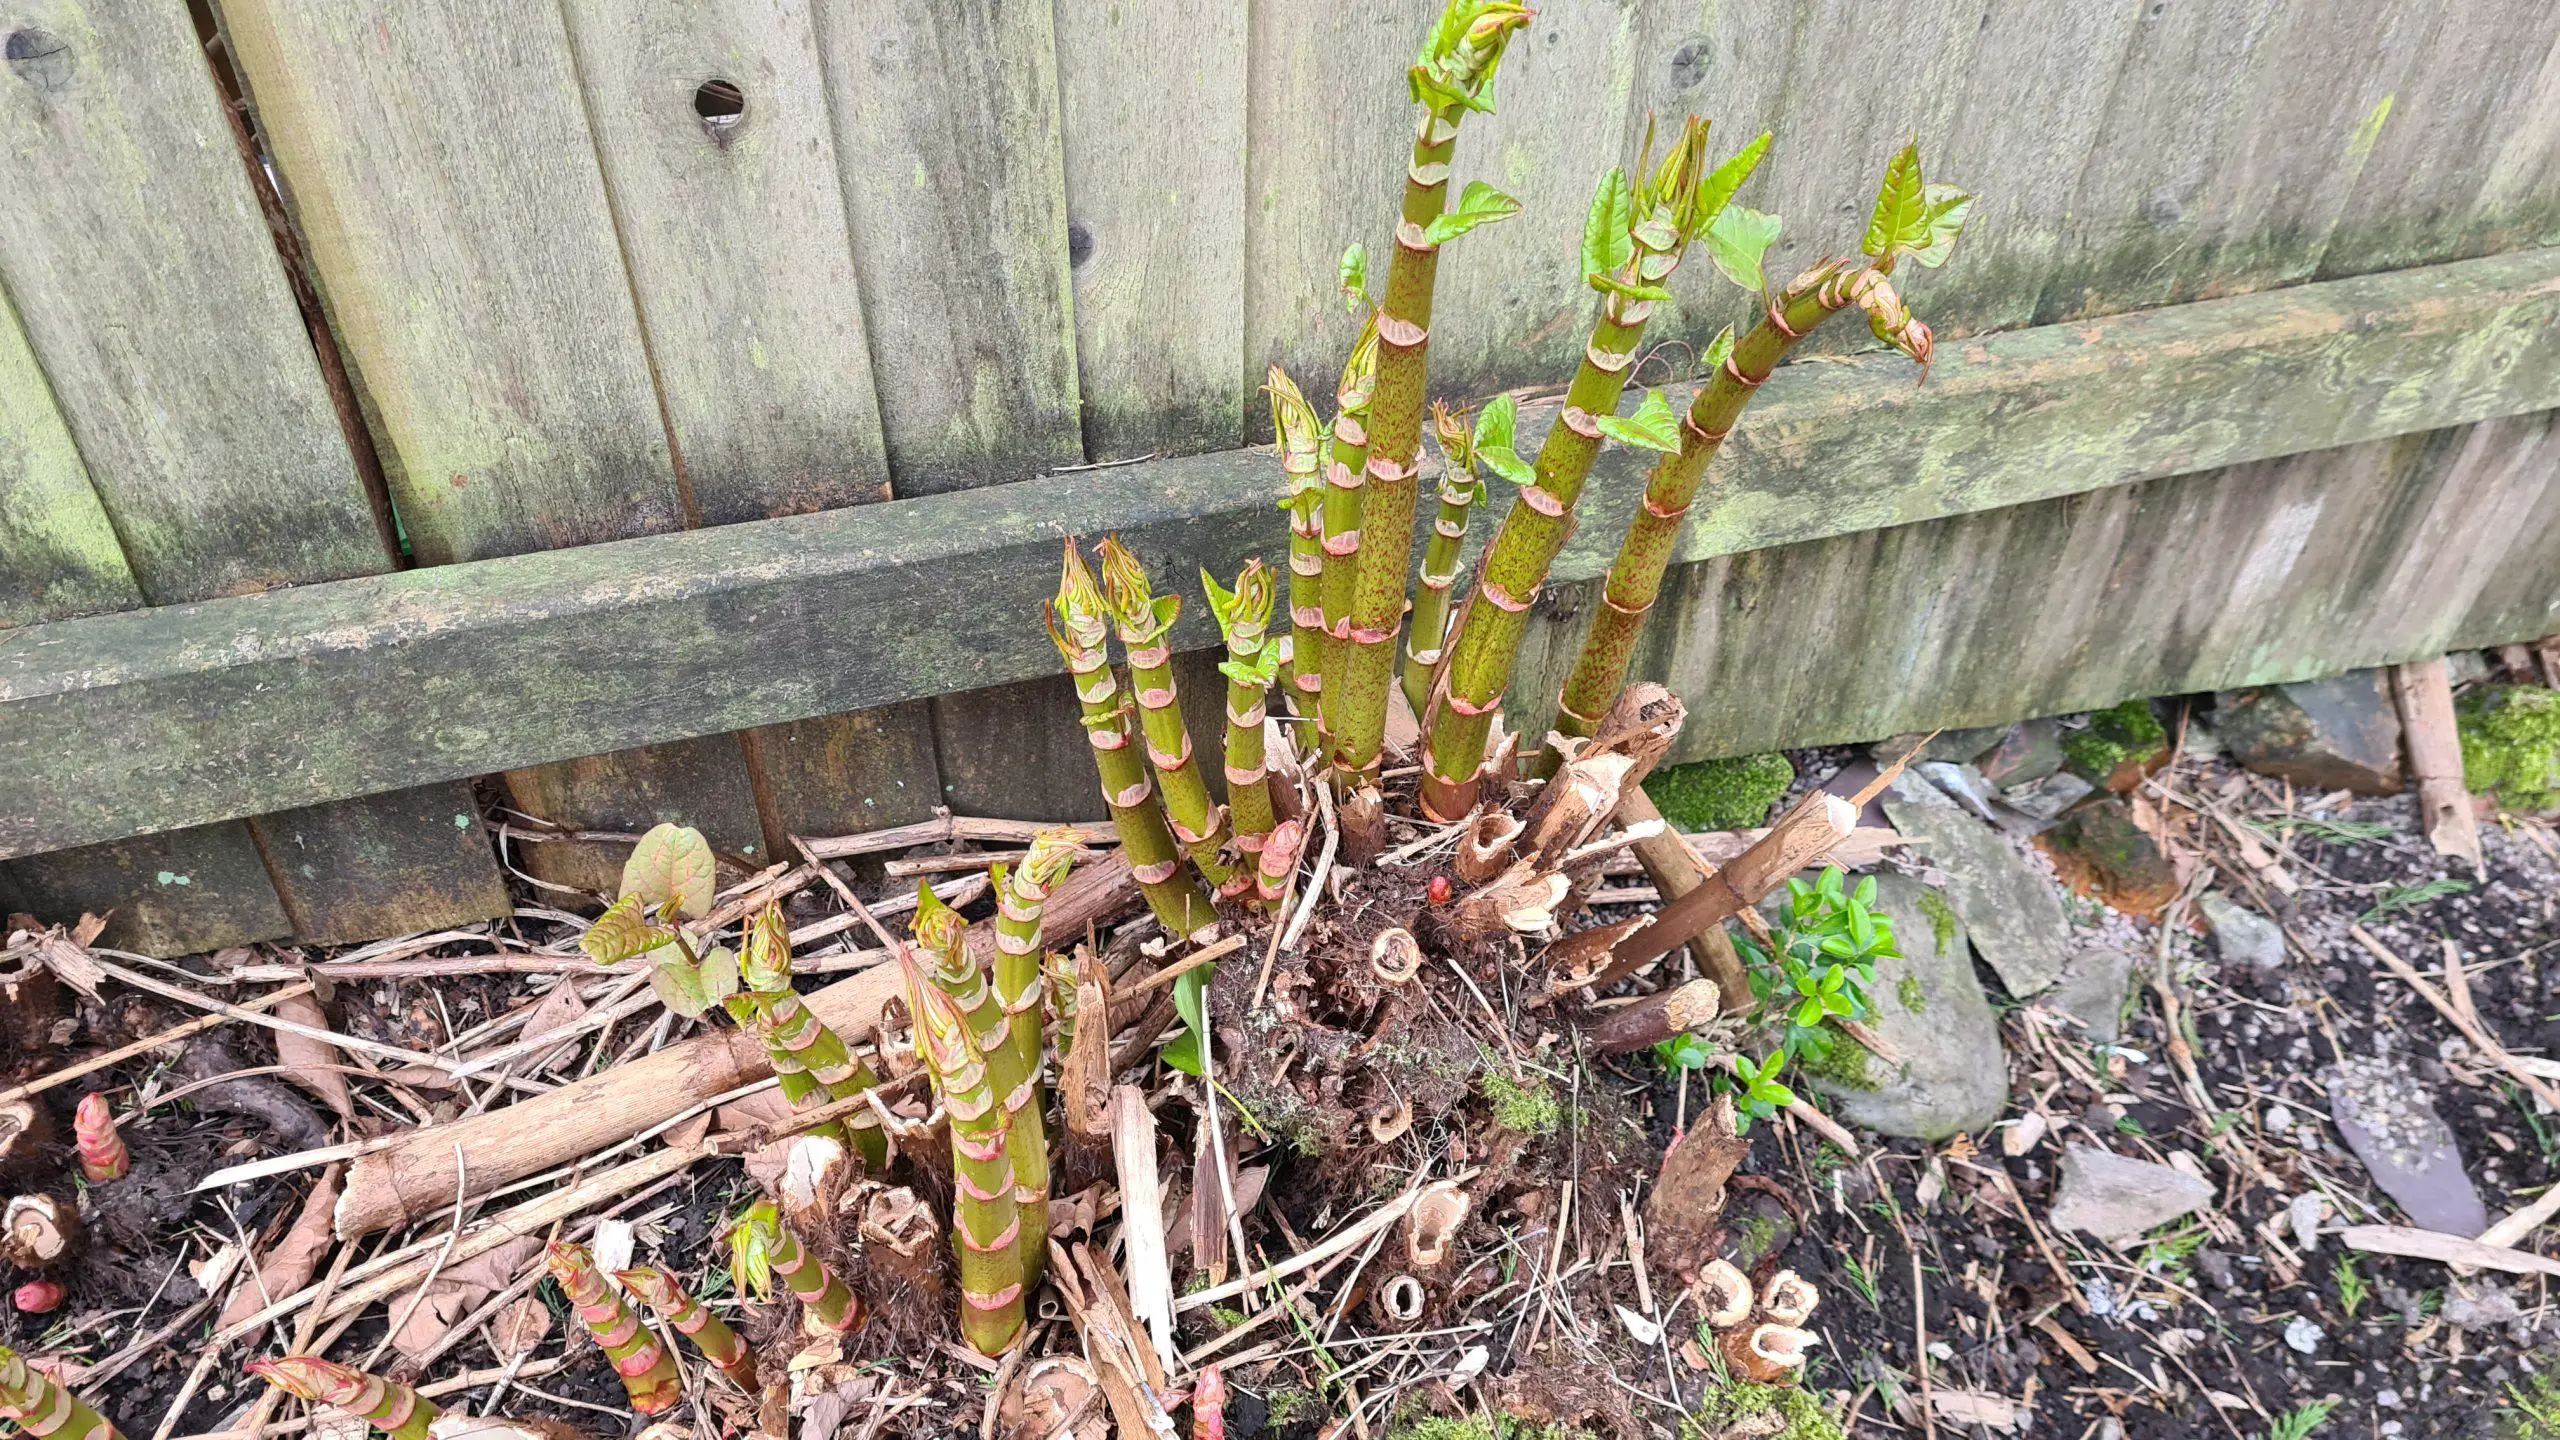 The growth of Japanese knotweed consumes such a large area from even the most compact crown